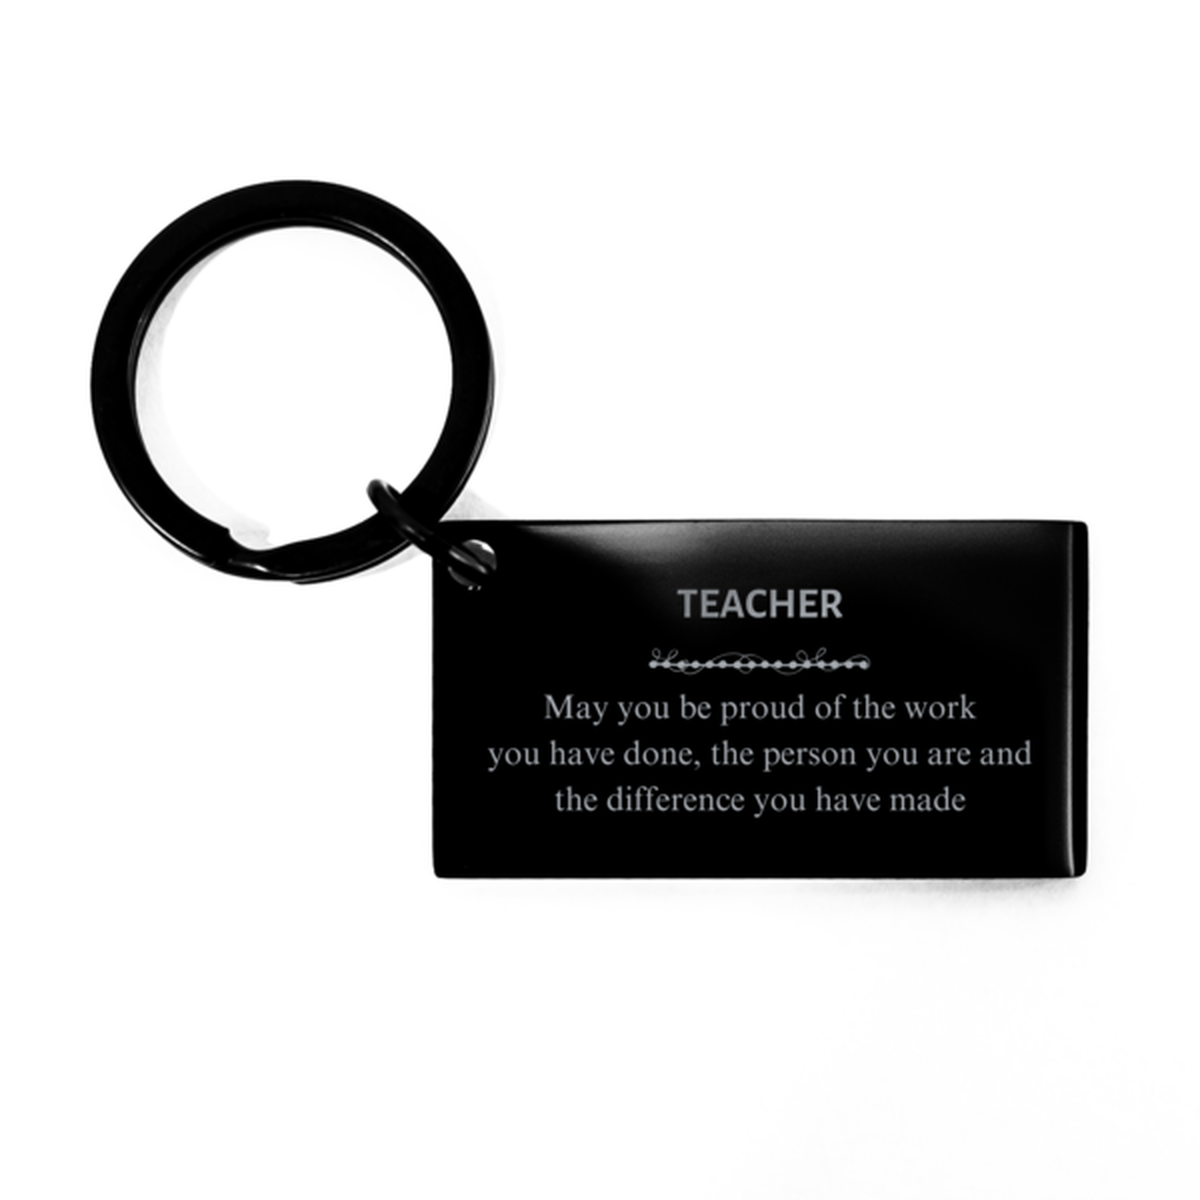 Word Processor May you be proud of the work you have done, Retirement Teacher Keychain for Colleague Appreciation Gifts Amazing for Teacher